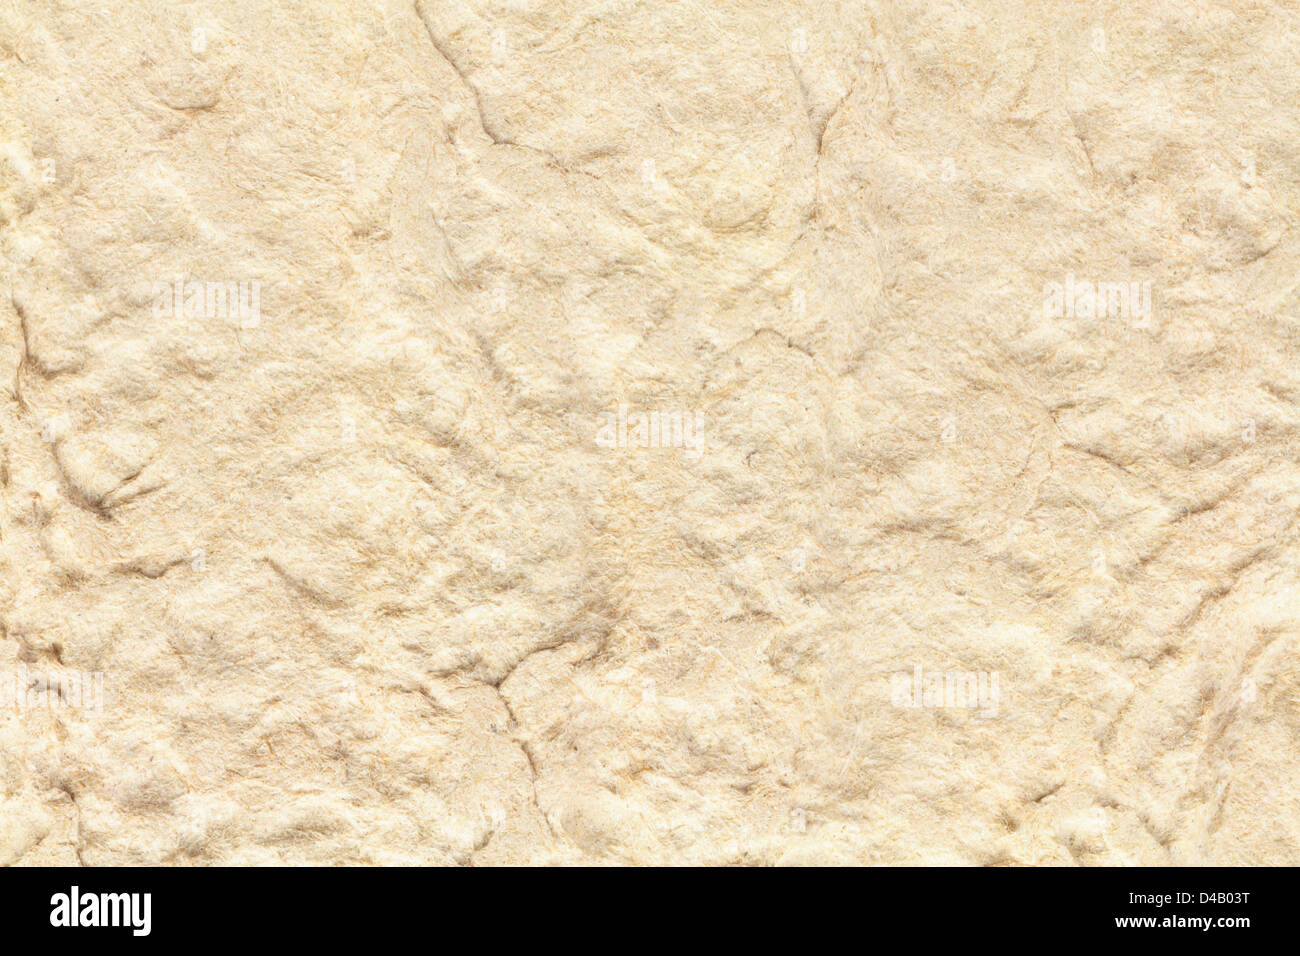 paper pulp surface texture Stock Photo